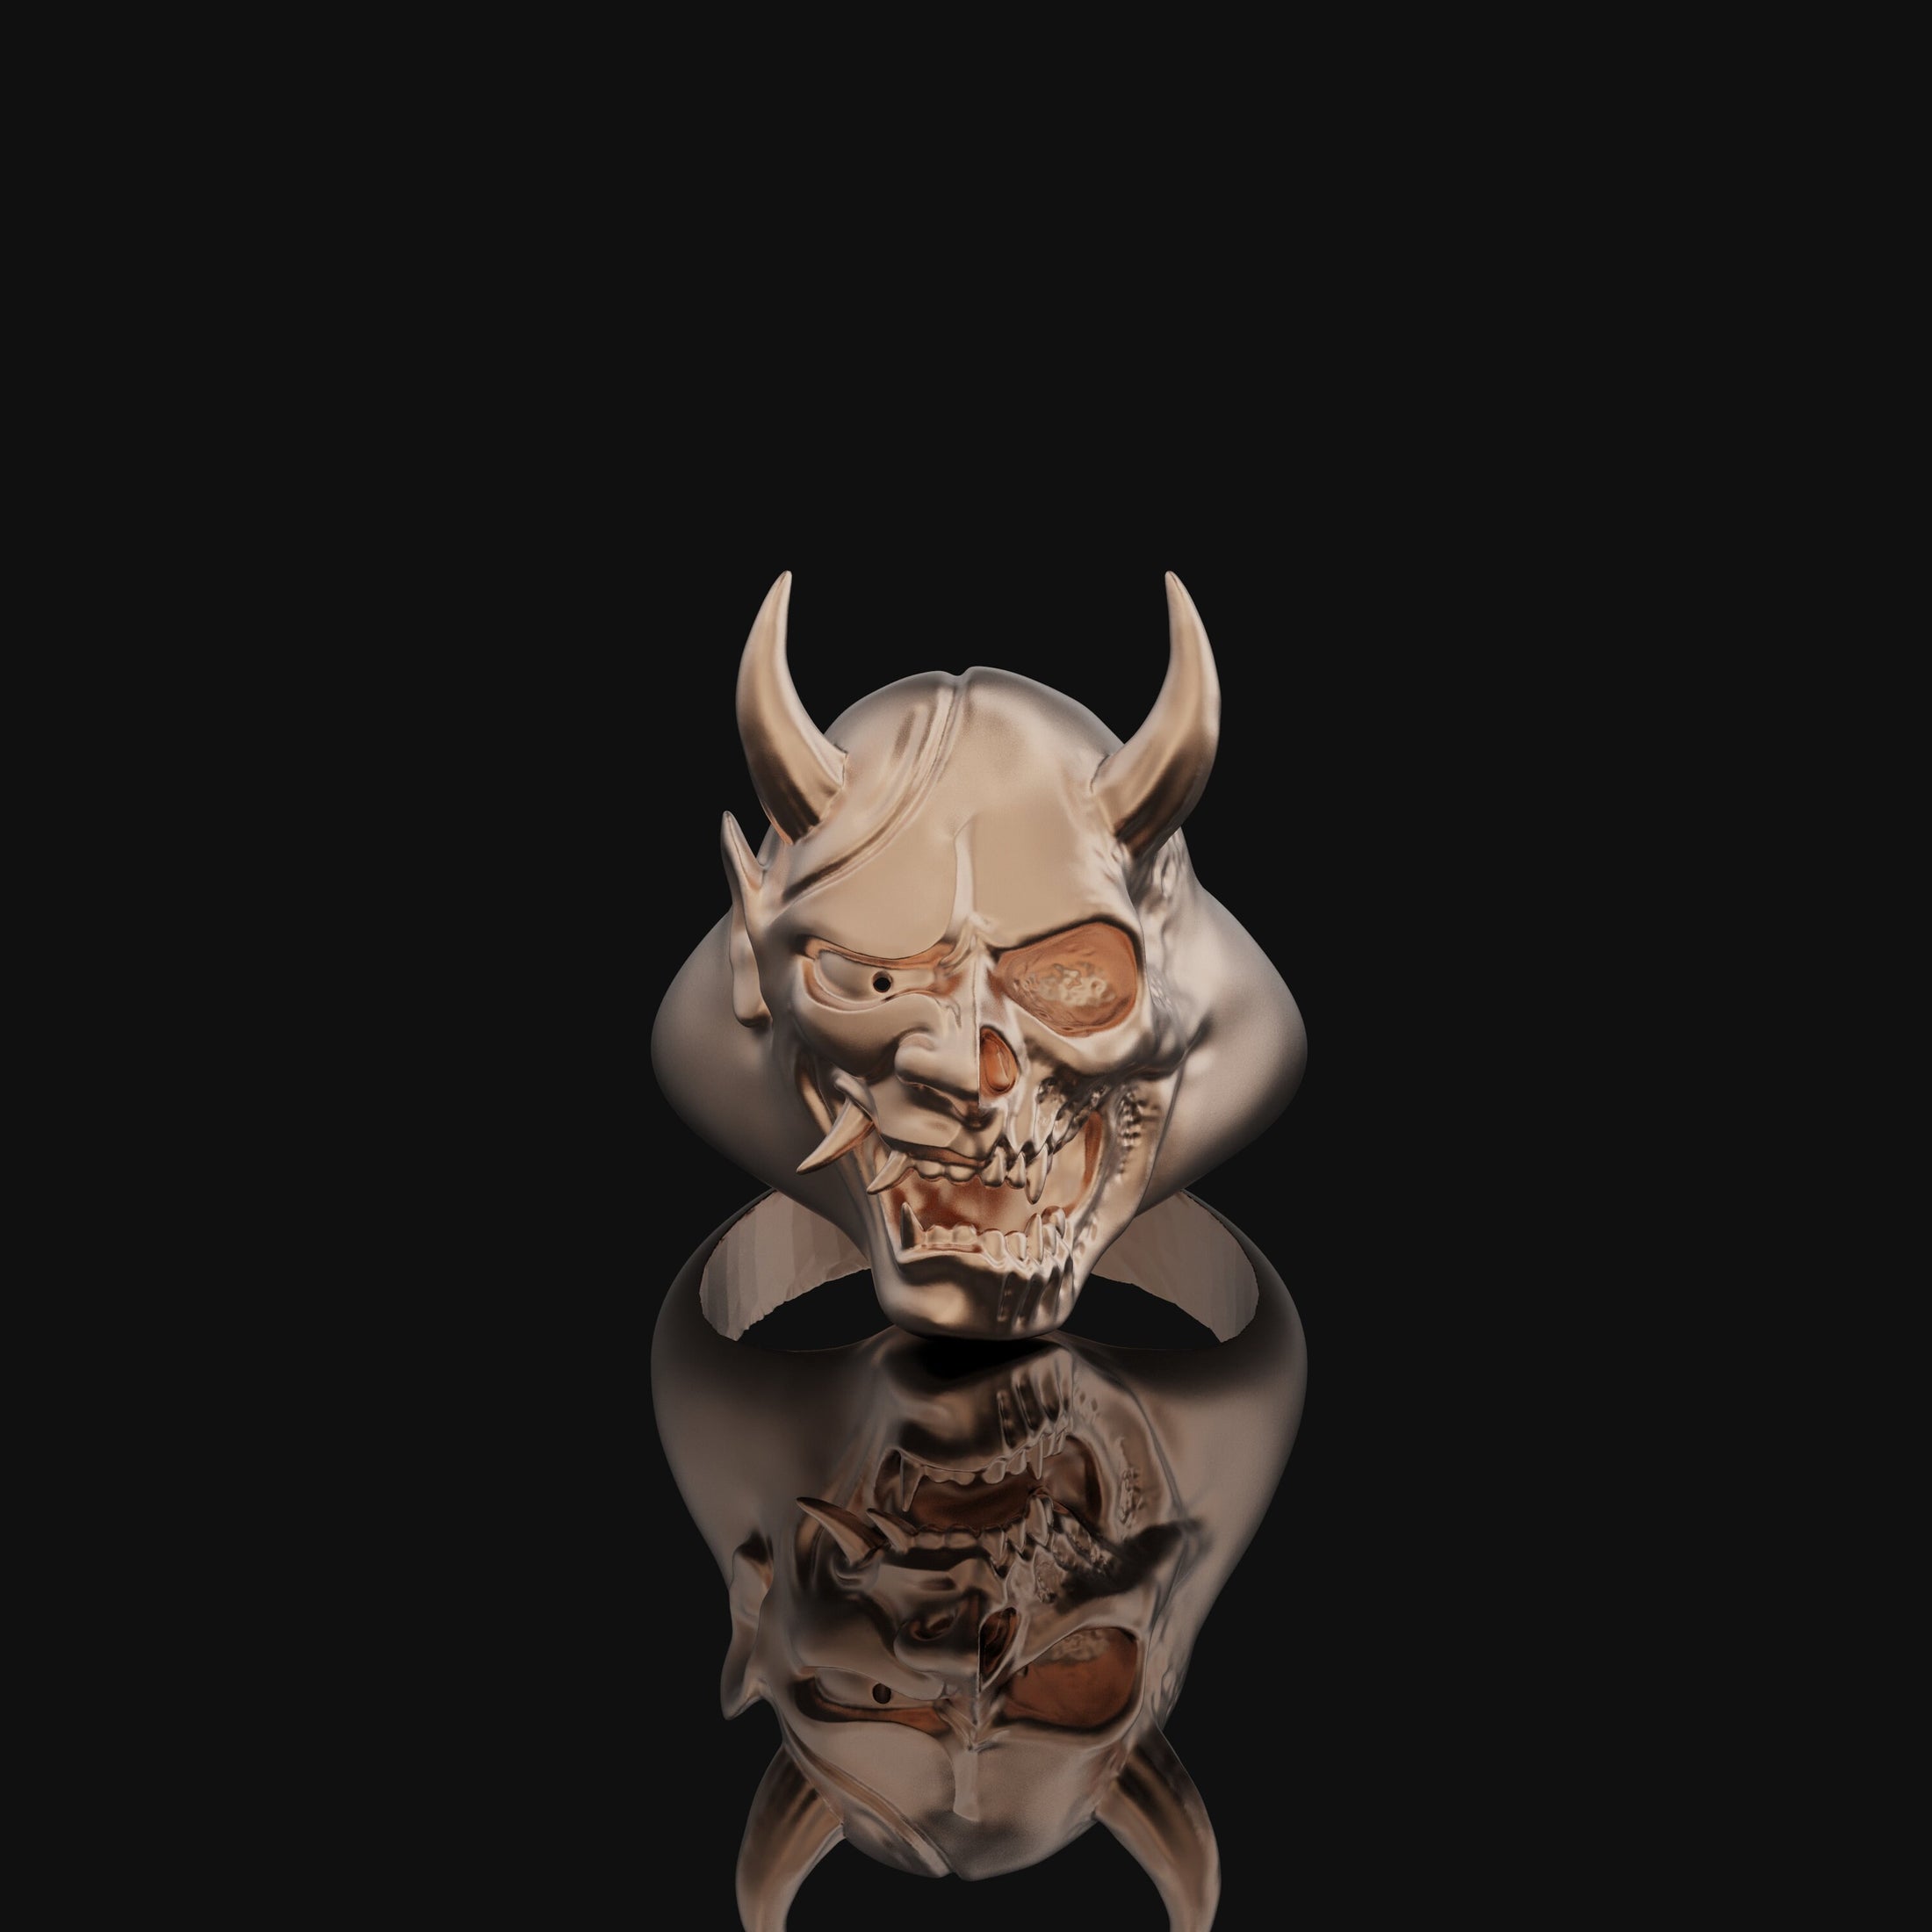 Silver Dead Oni Ring, Half-Breed Oni-Hannya Design, Japanese Skull Ring, Unique Yokai Inspired Jewelry, Cultural Mythology Piece Rose Gold Finish